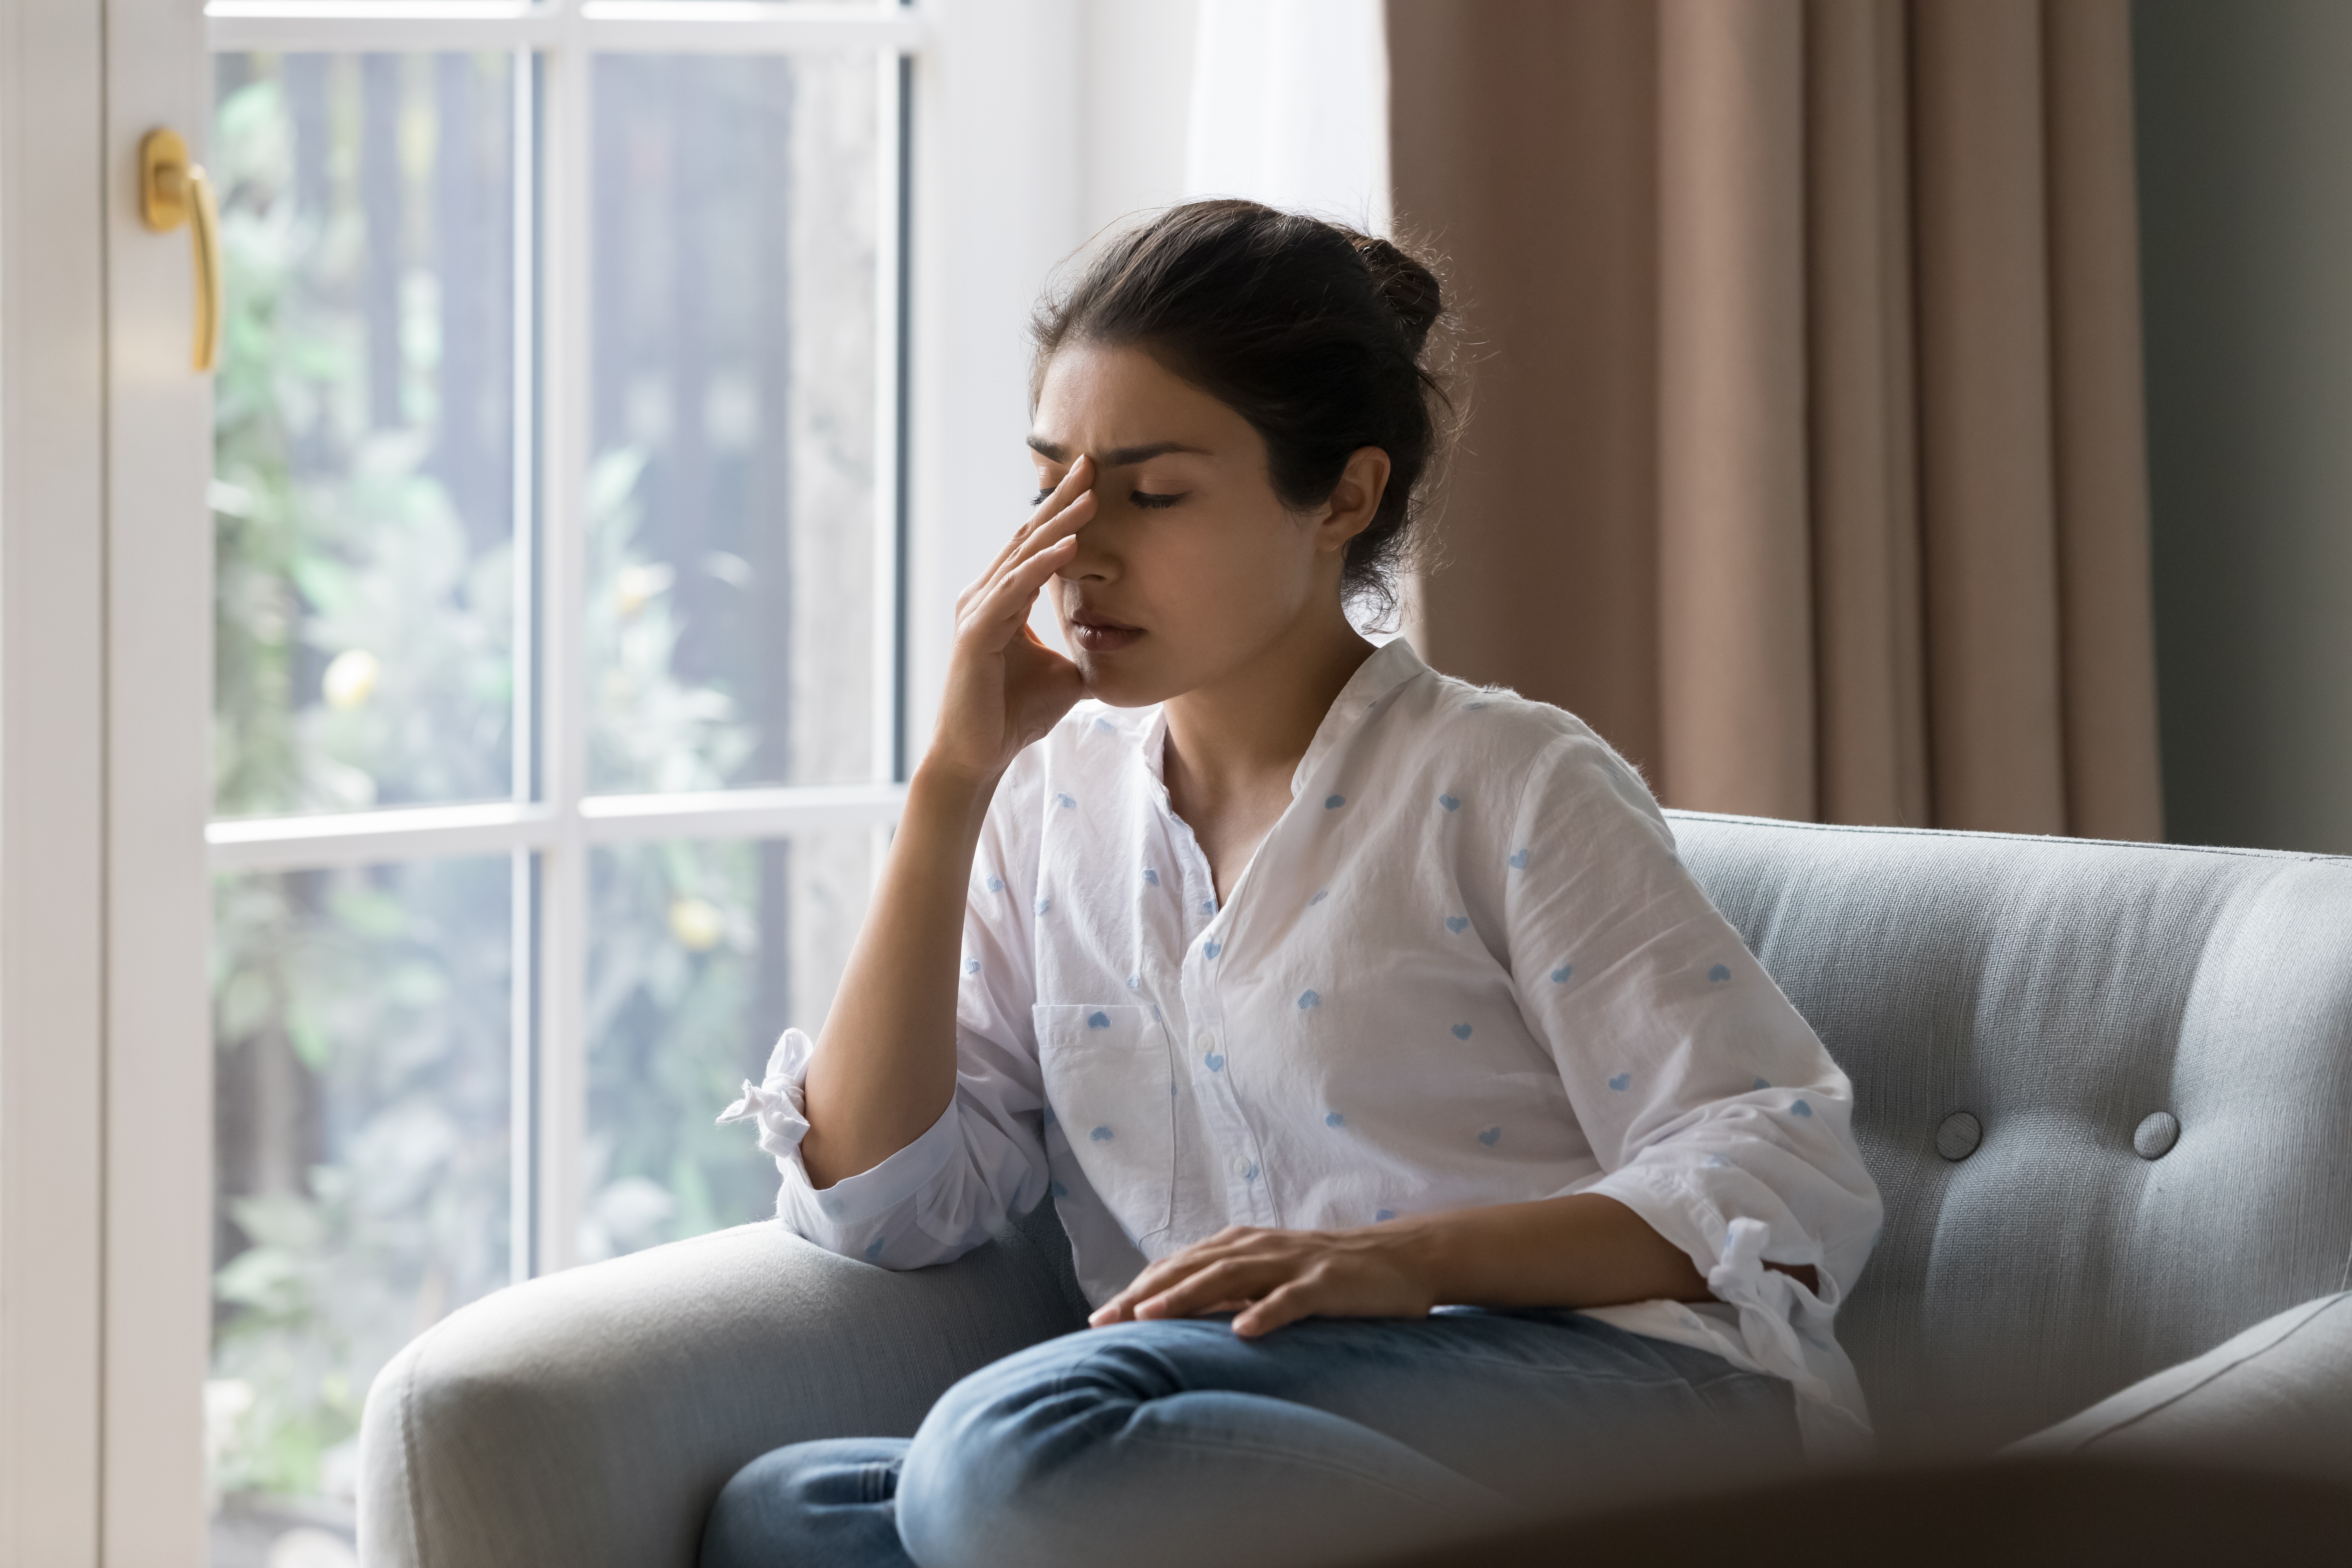 Depressed frustrated young woman | Source: Shutterstock